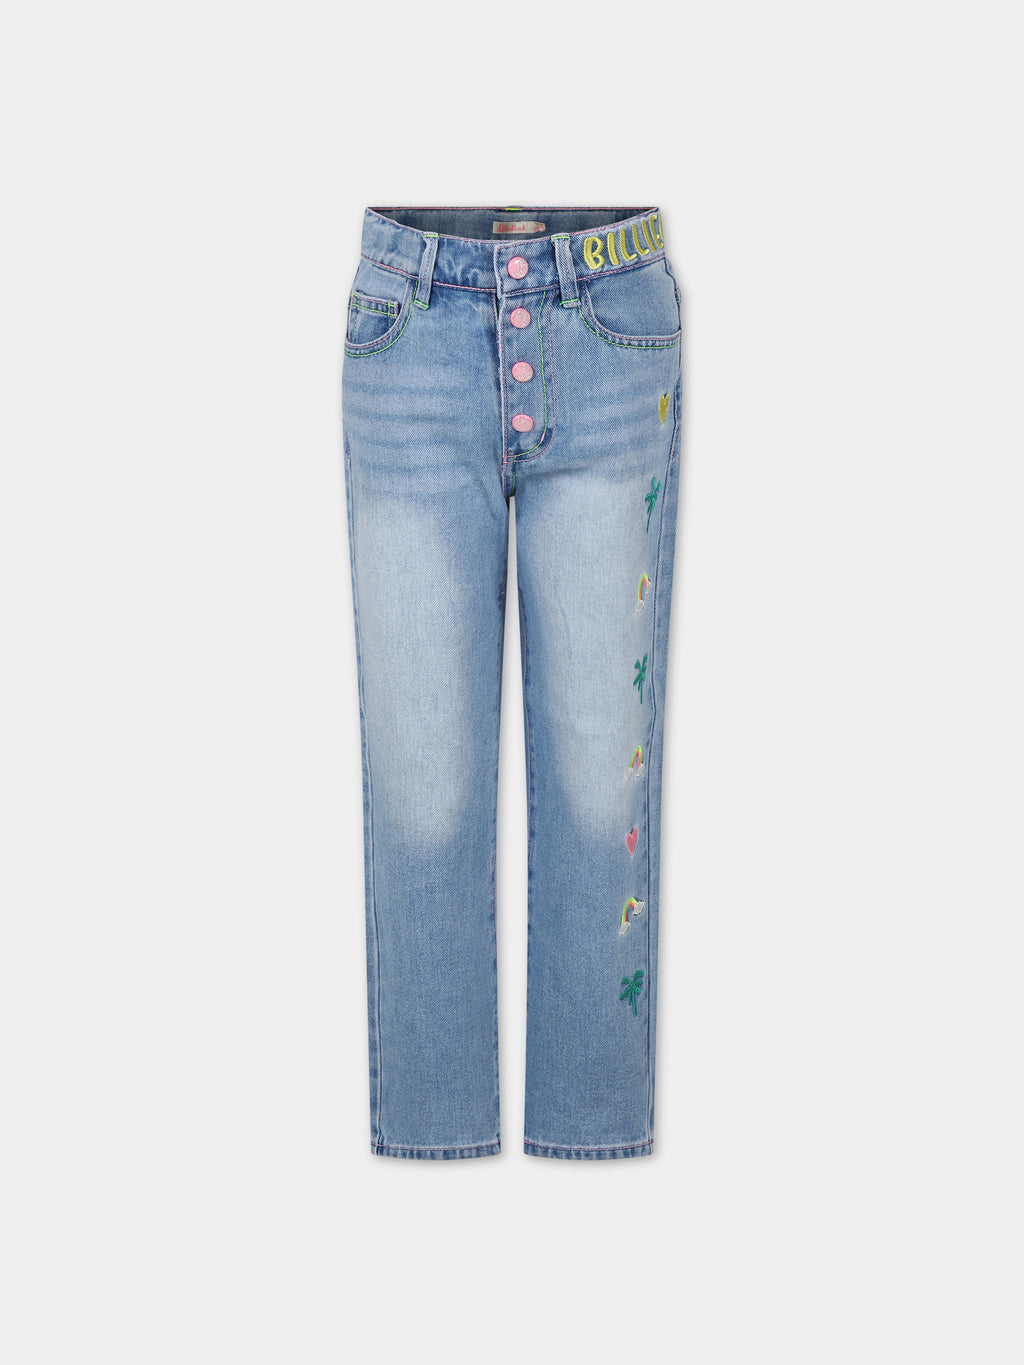 Denim jeans for girl with all-over embroidery